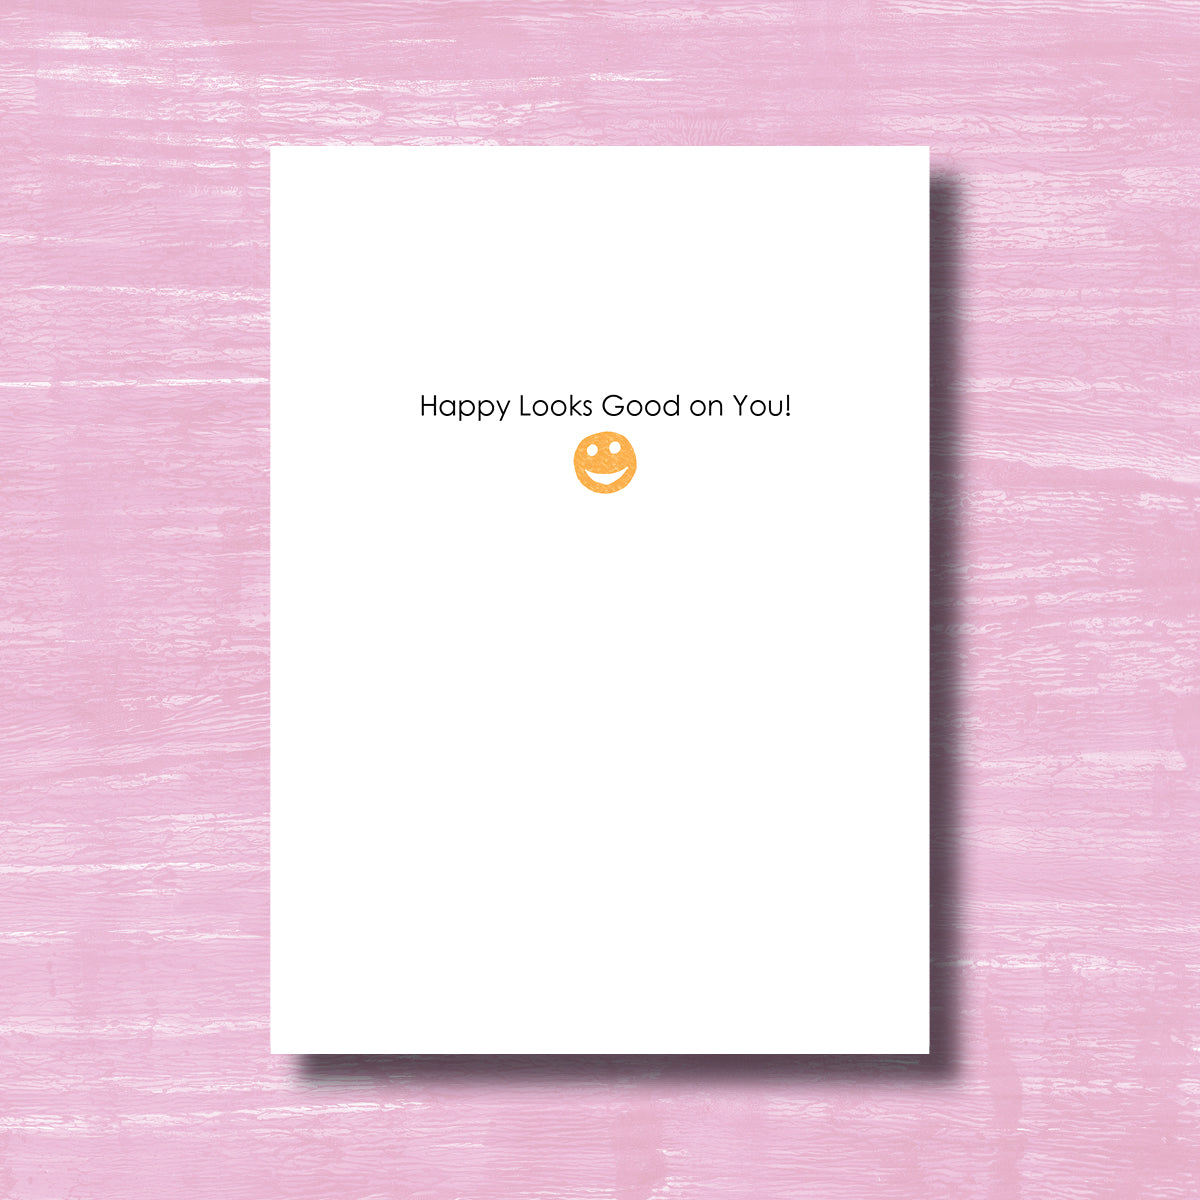 It's Nice to See You Smile - Greeting Card